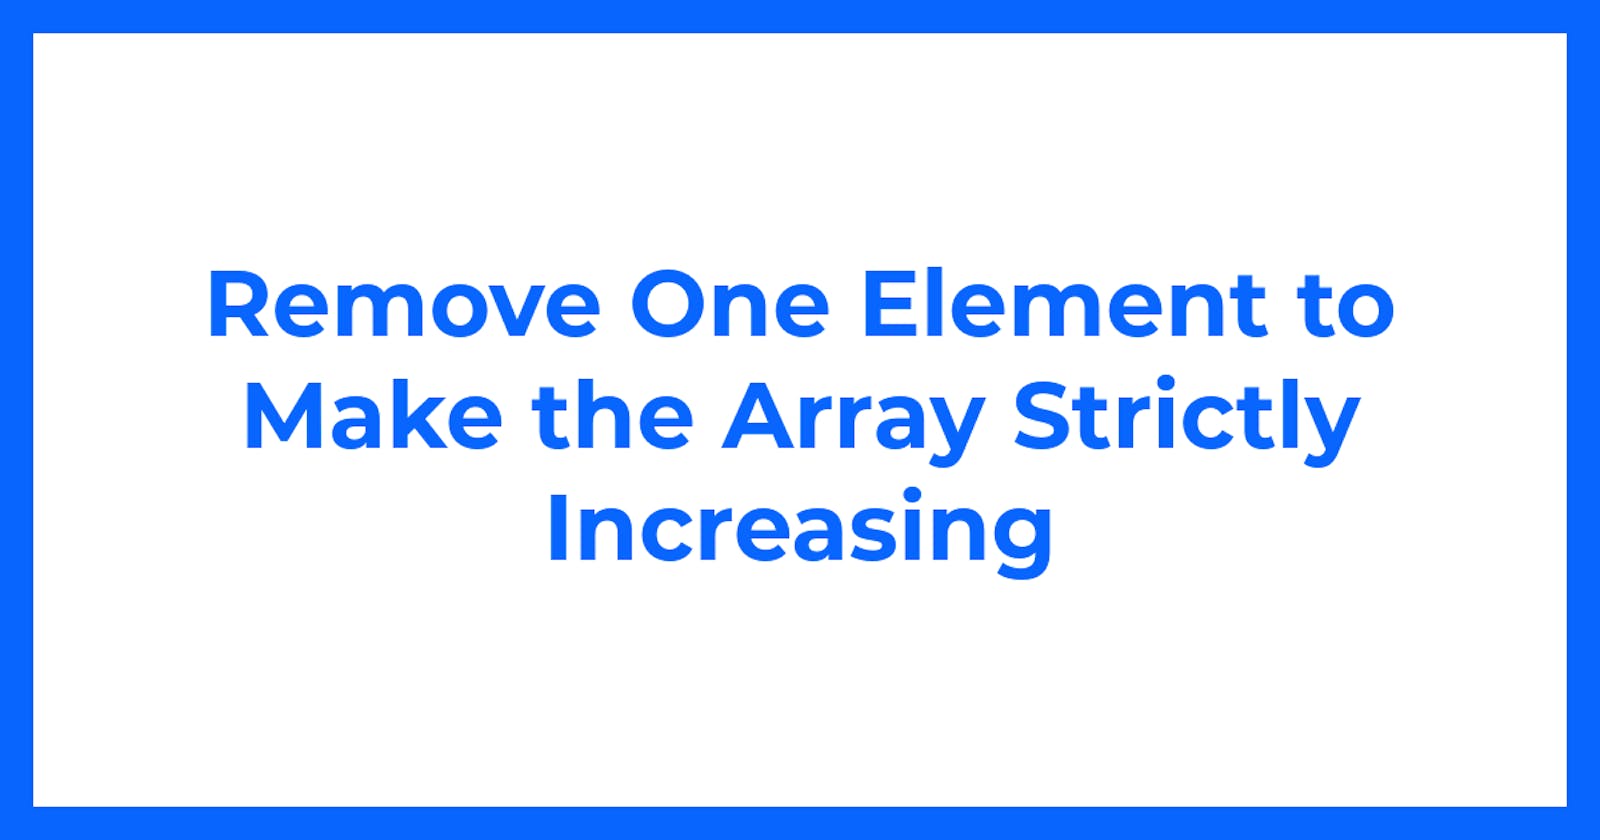 Remove One Element to Make the Array Strictly Increasing